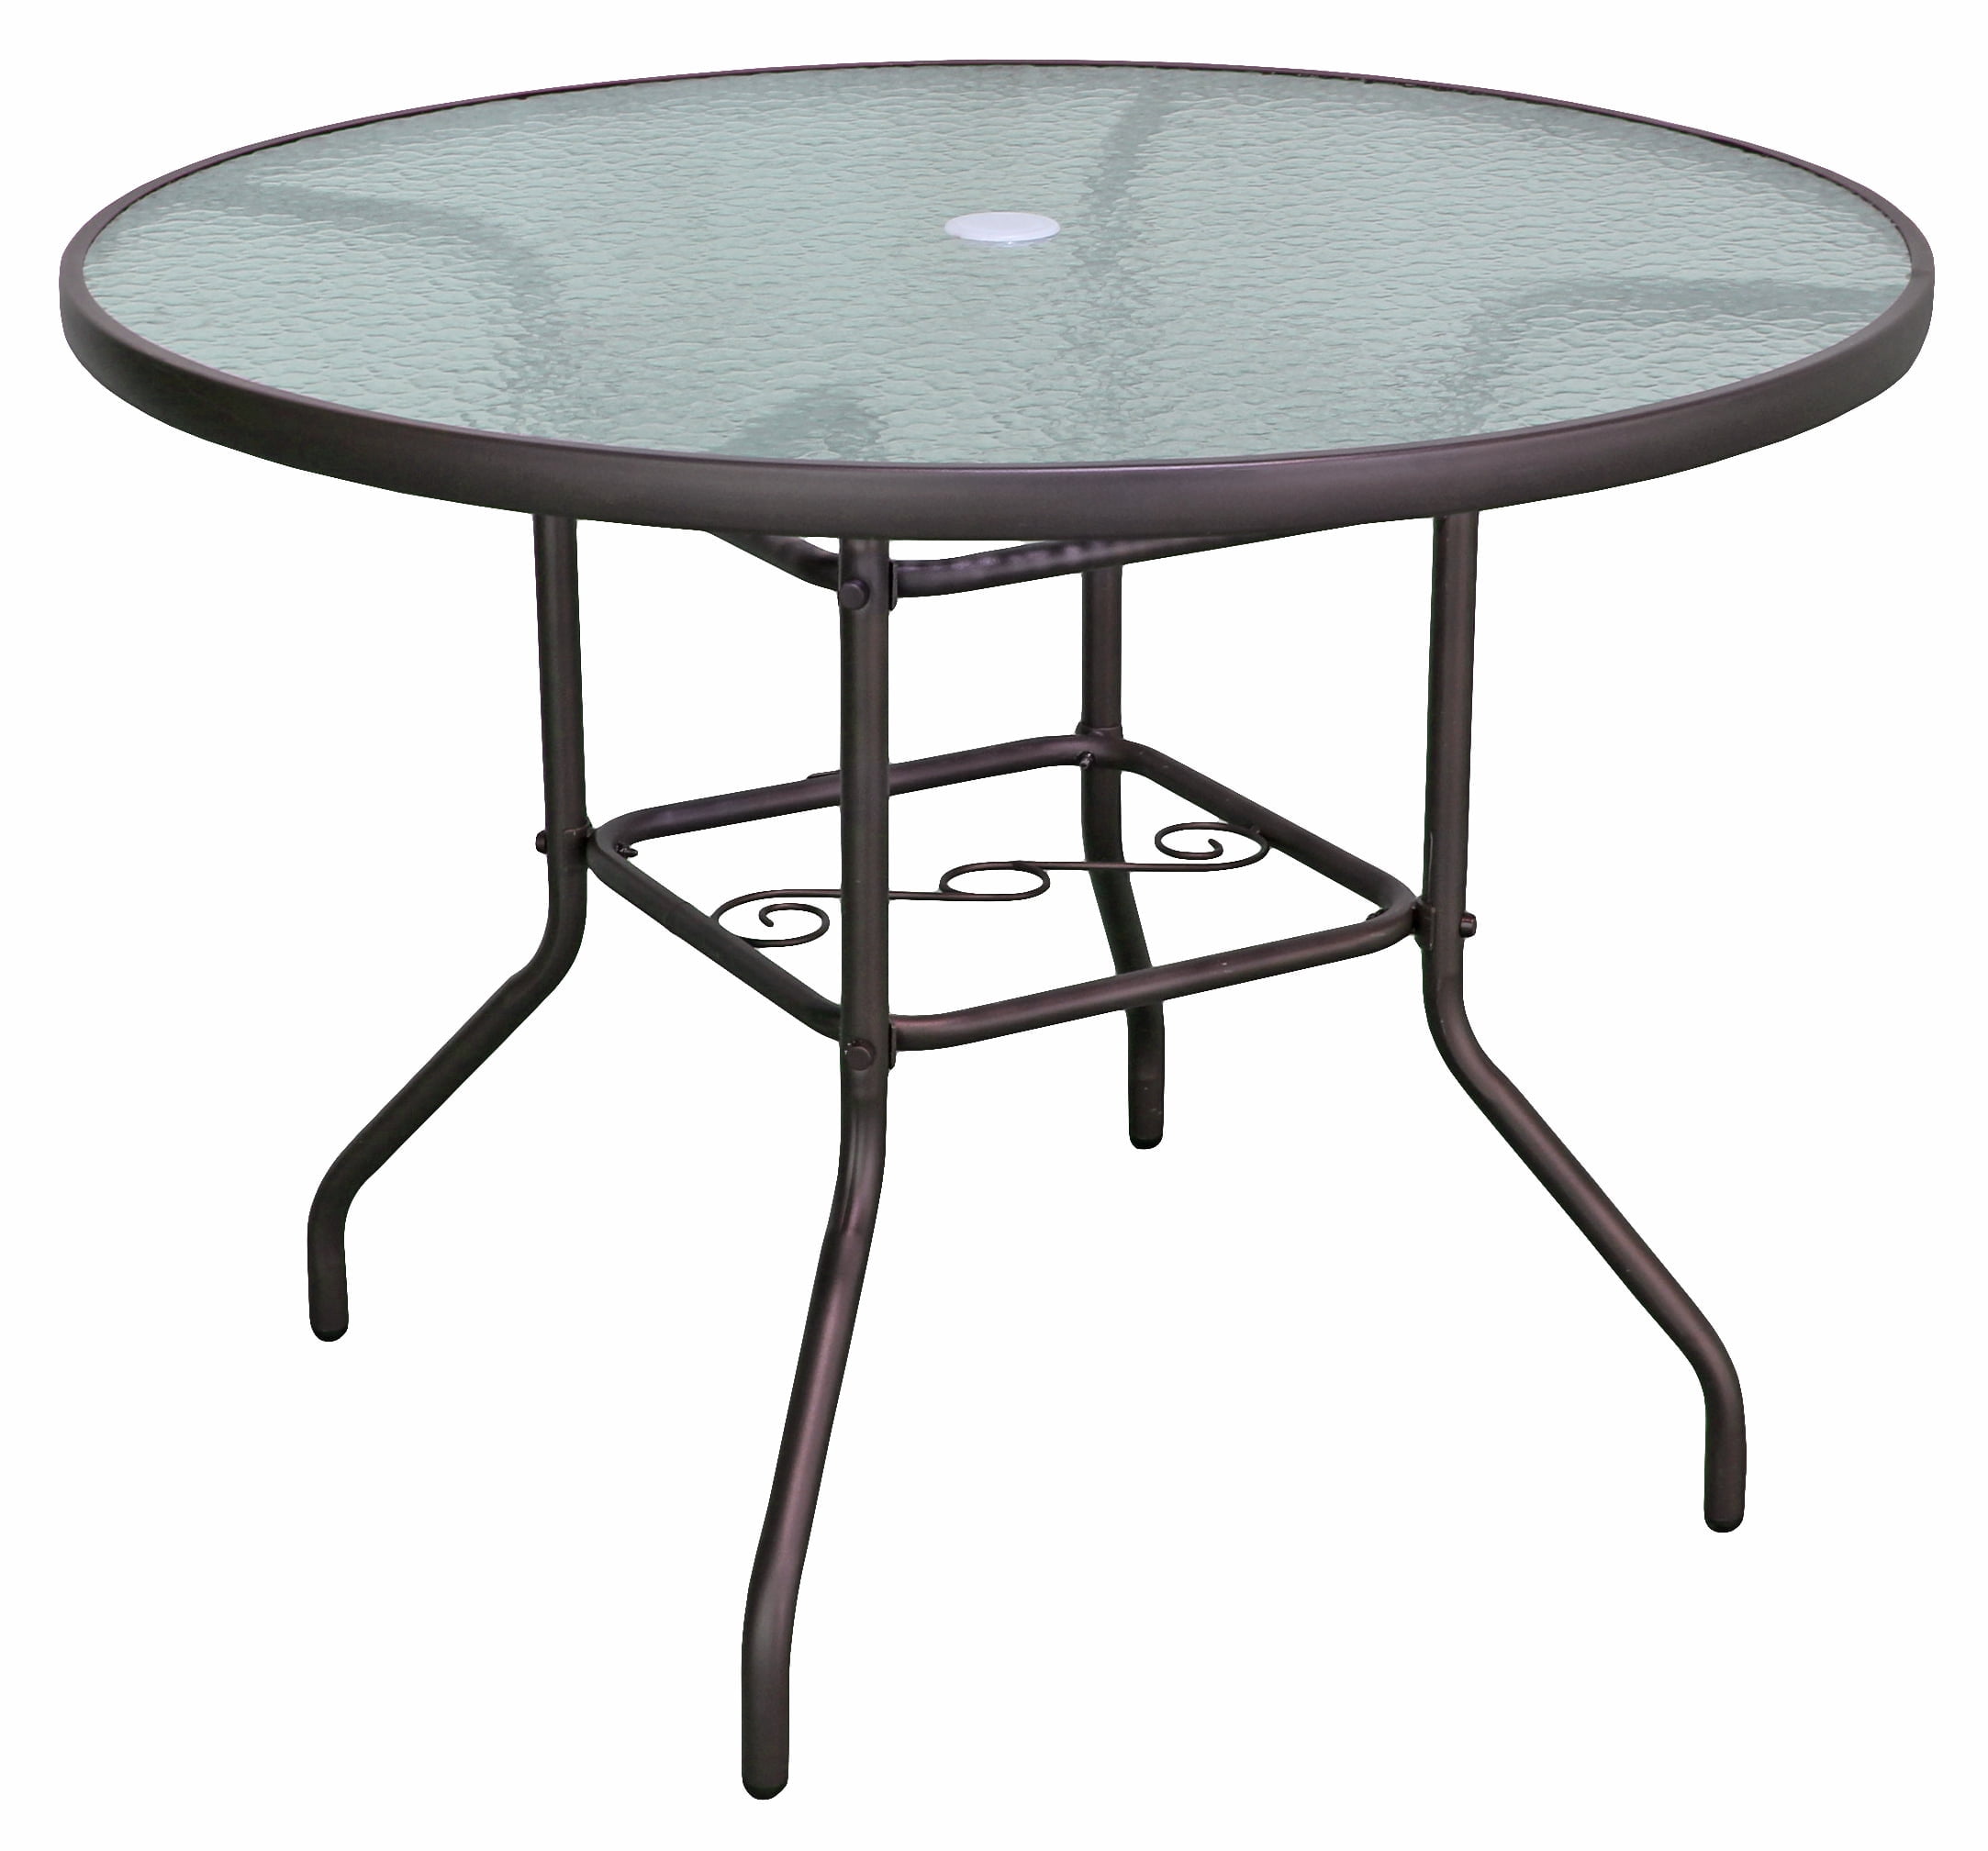 Steal Framed Garden Table in a bronze finish with Glass Top 